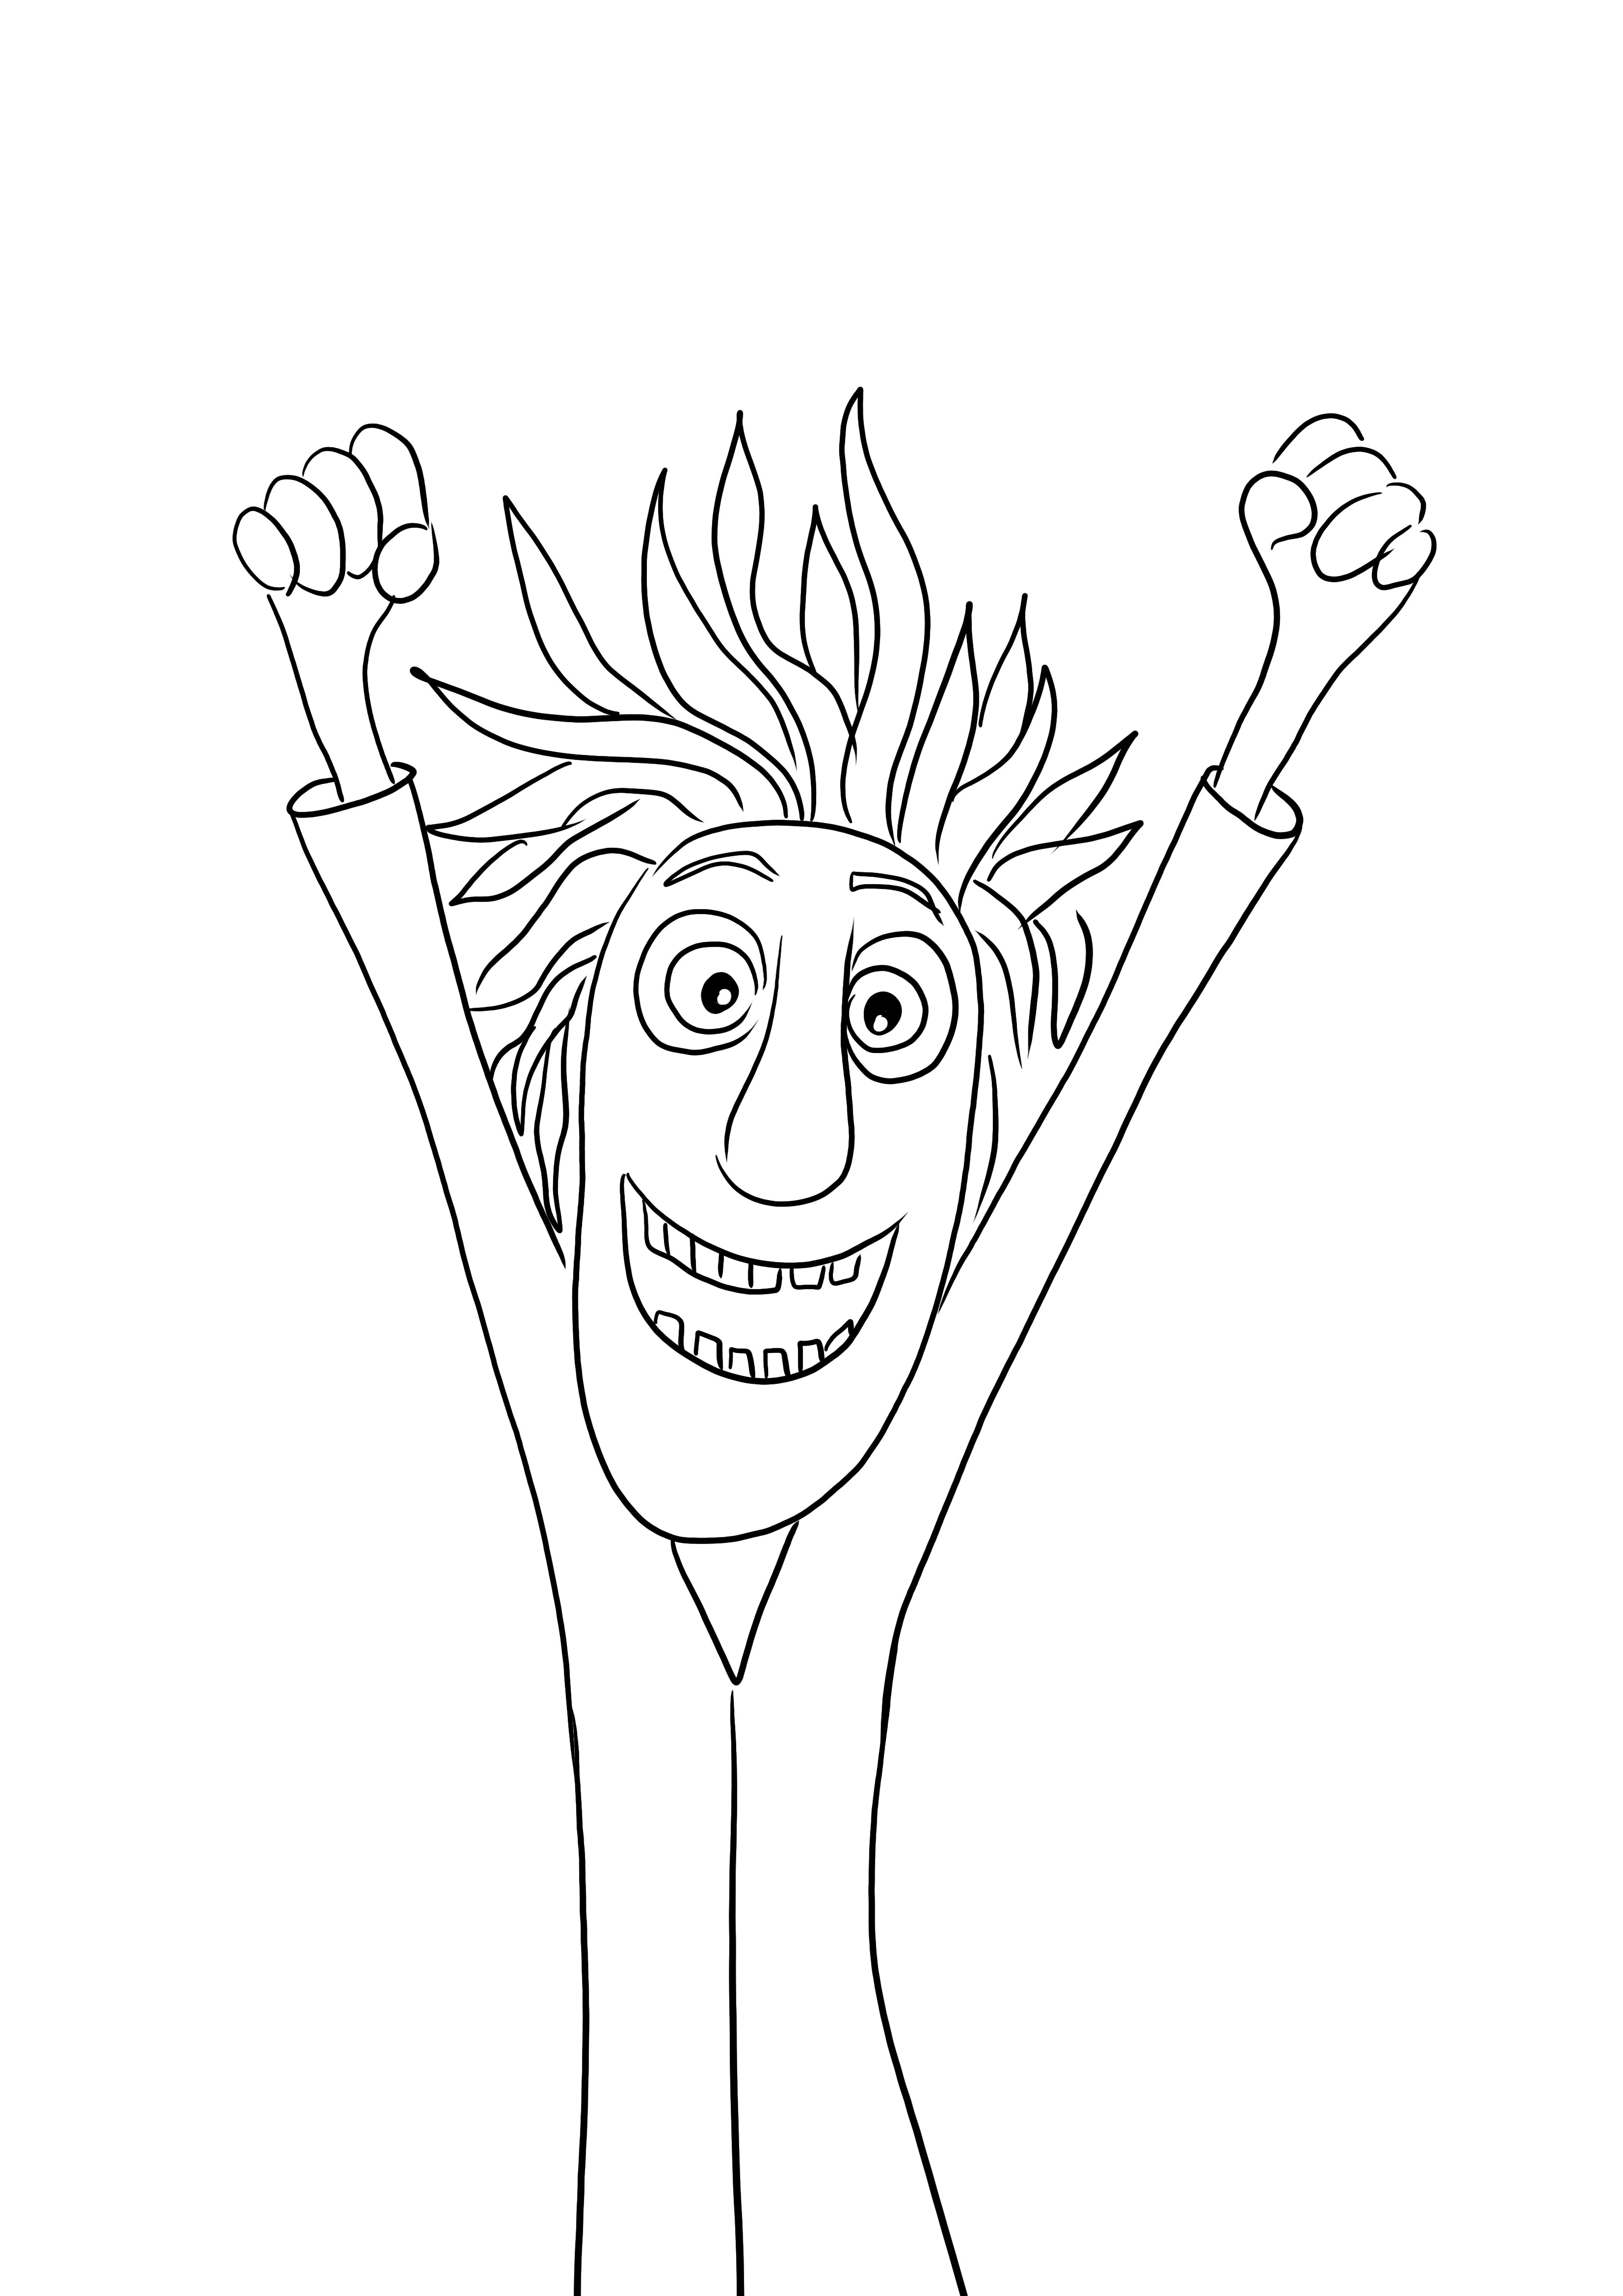 Here is a coloring sheet of happy Flint Lockwood-free to print for kids